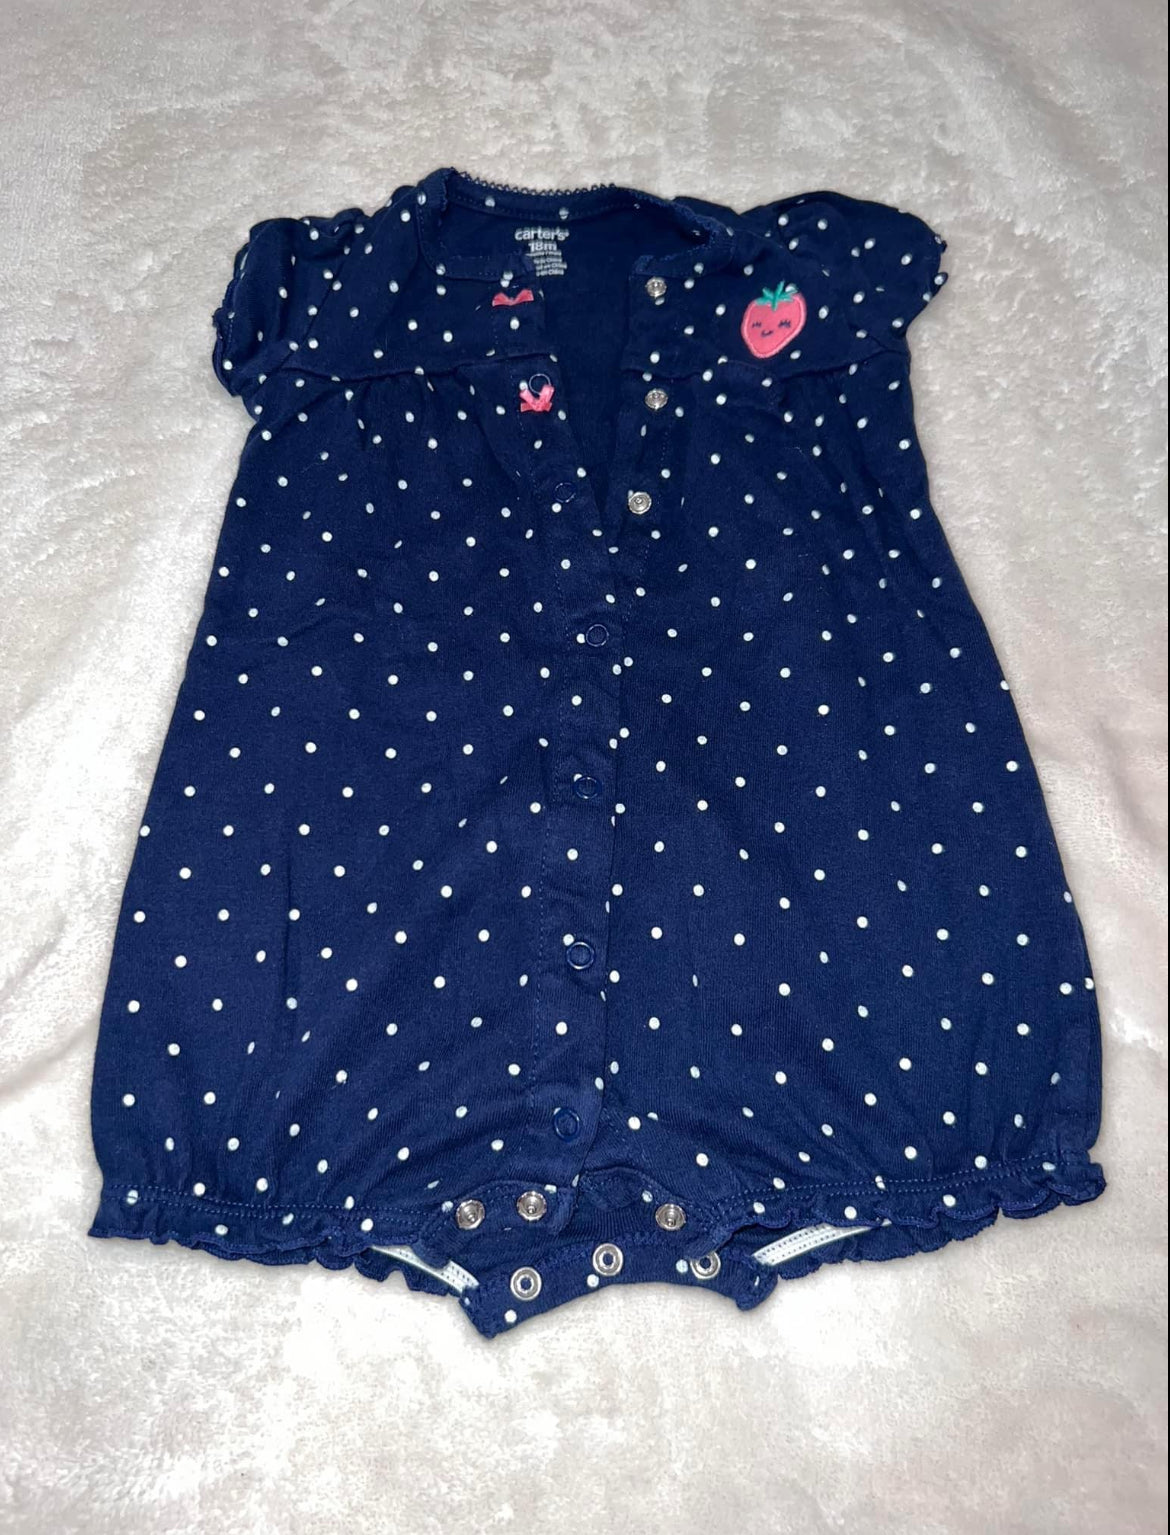 18mon carters bubble, blue and with white polka dots